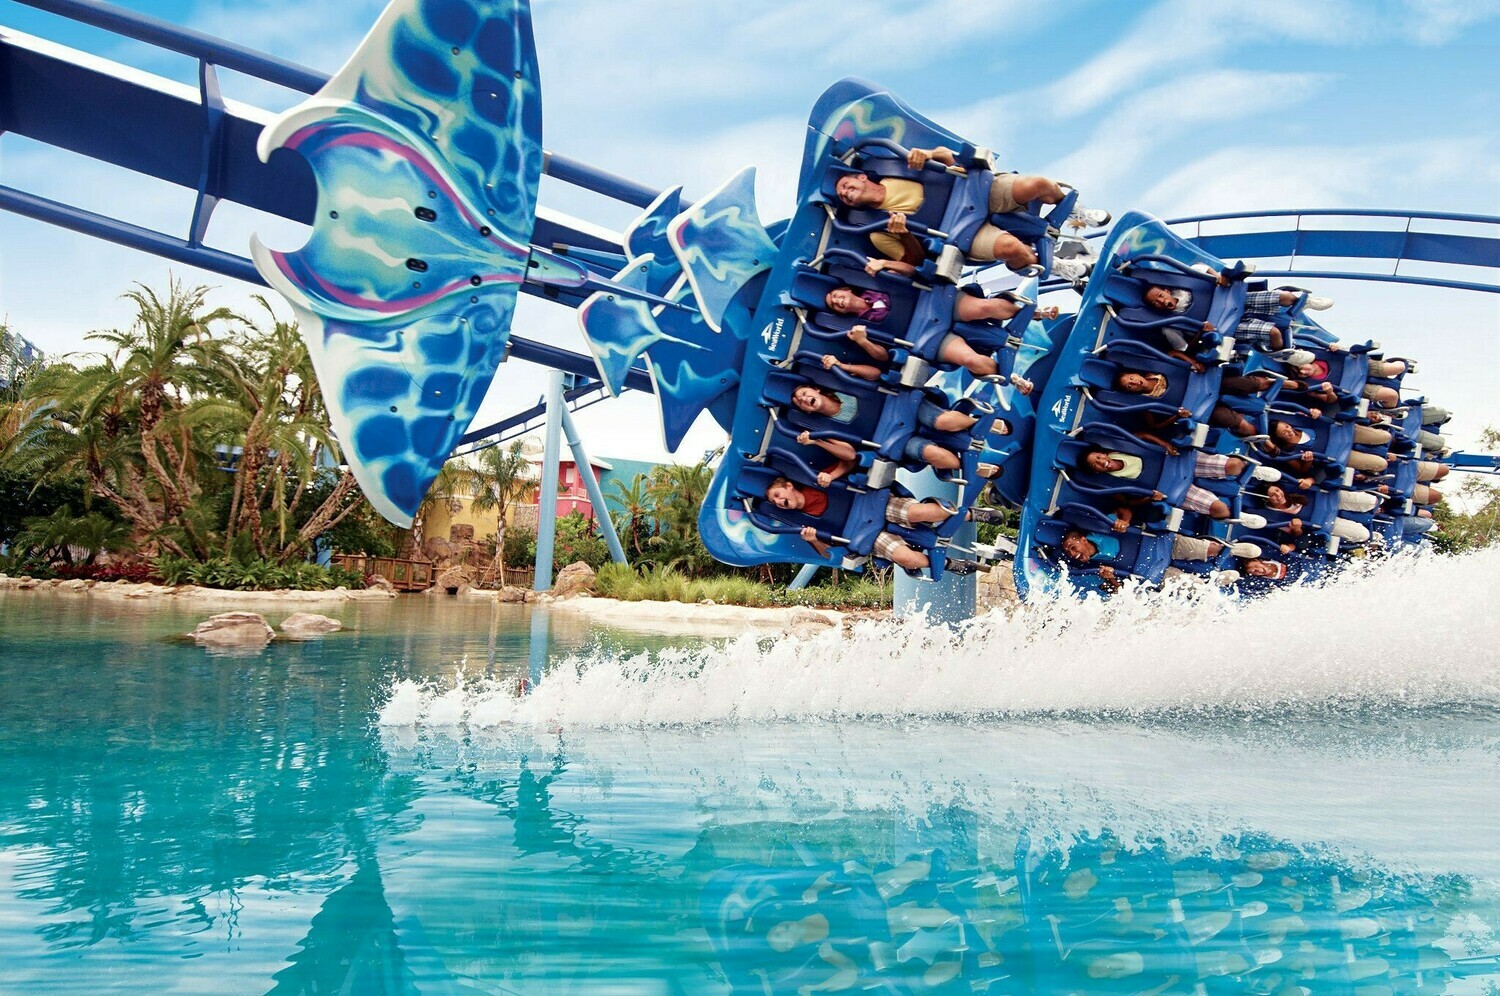 4 Days 3 Nights Orlando Florida minutes from all the theme parks!
Save big!!! also bonus $50 Visa Gift Card